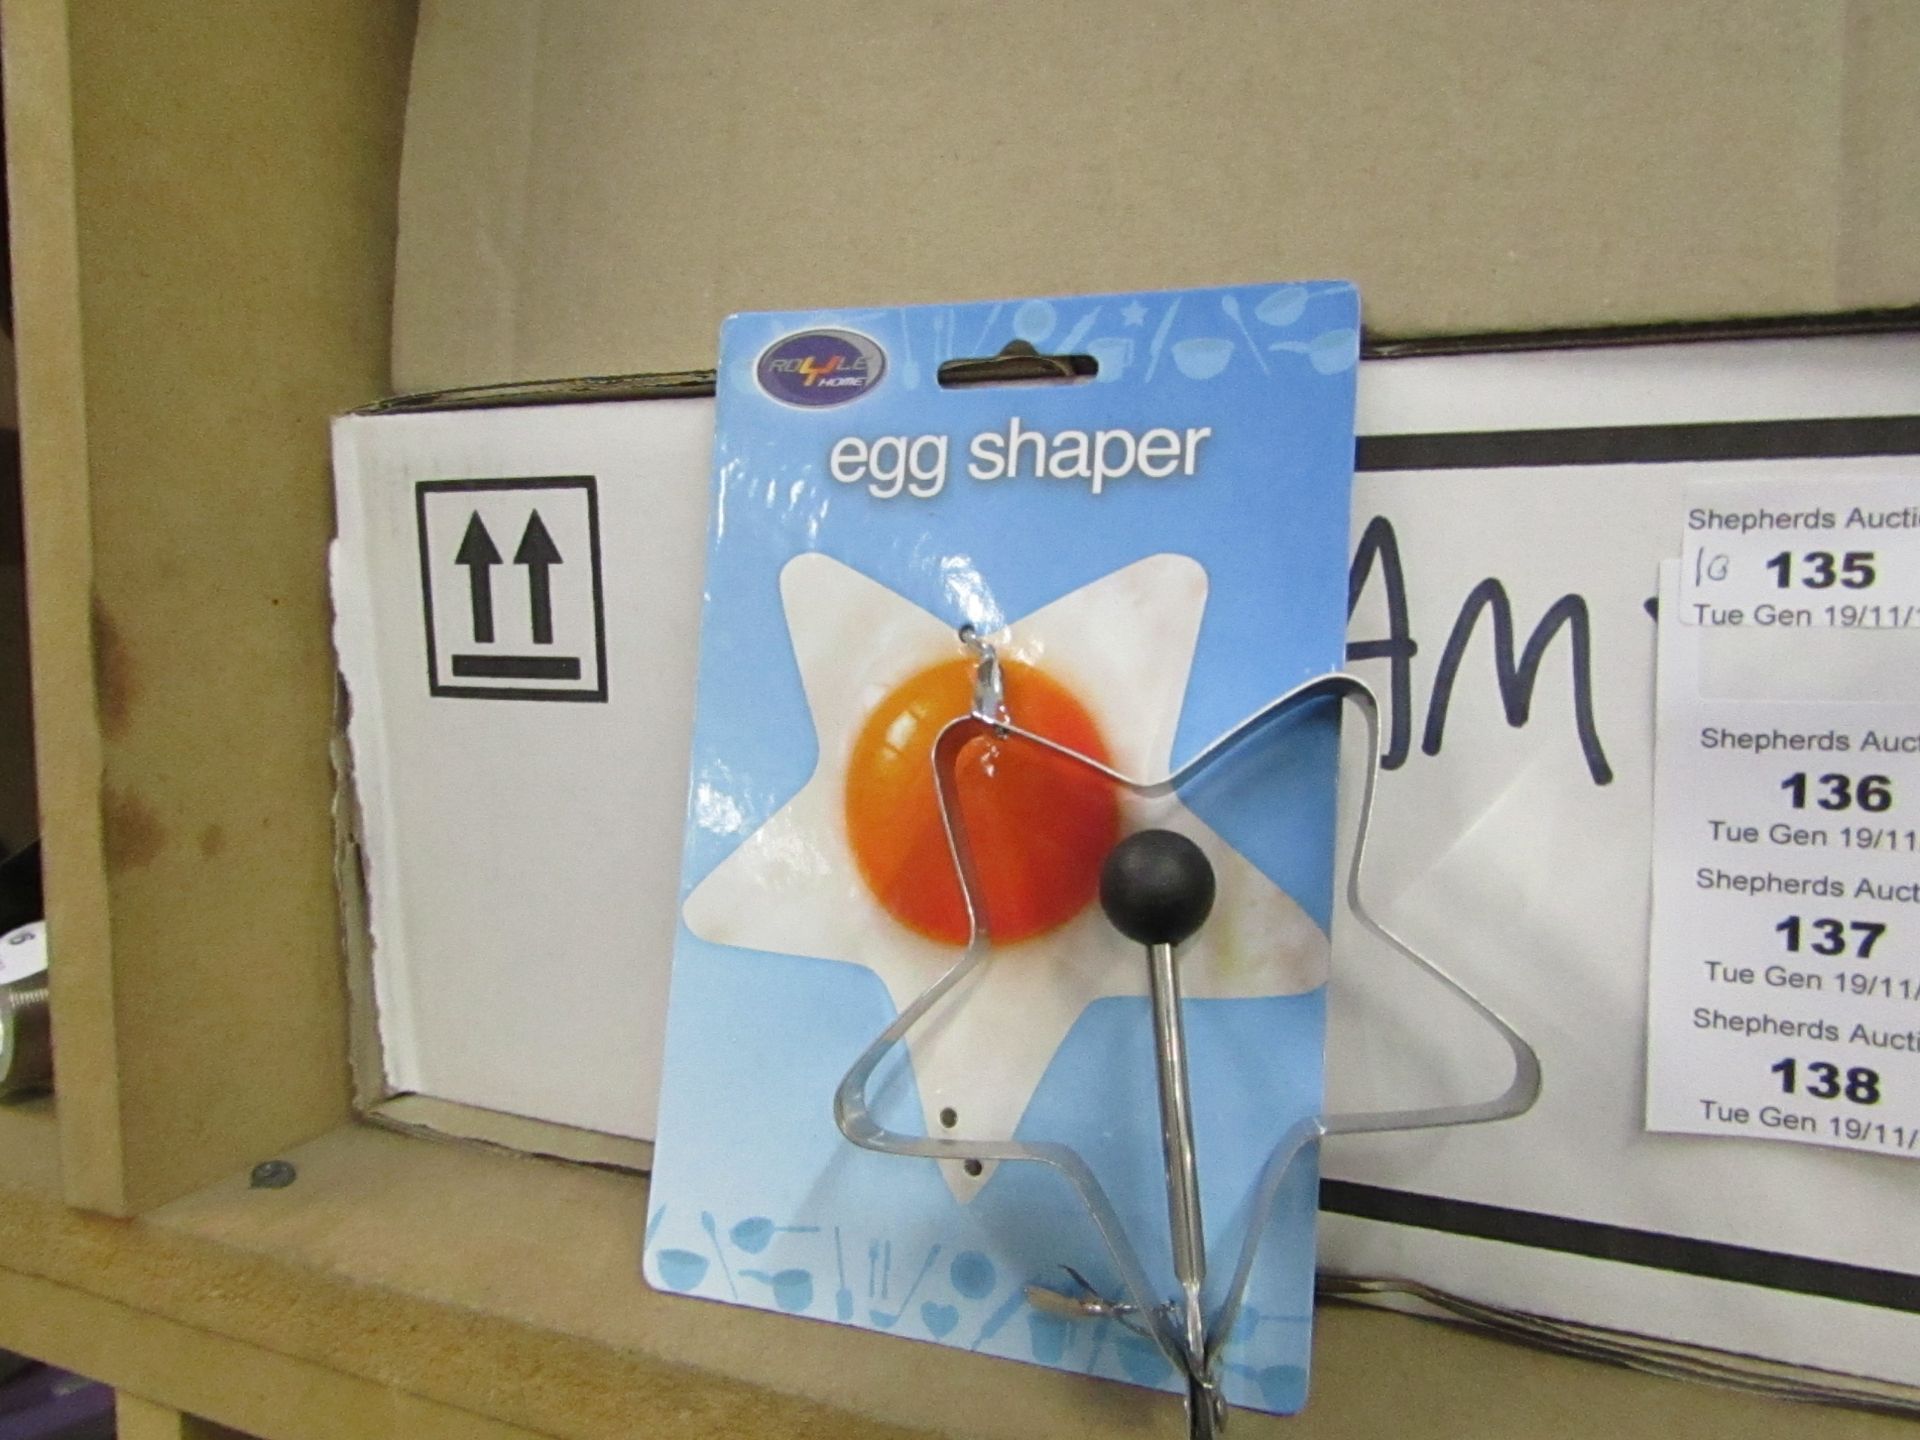 10x Egg Shapers new & packaged.